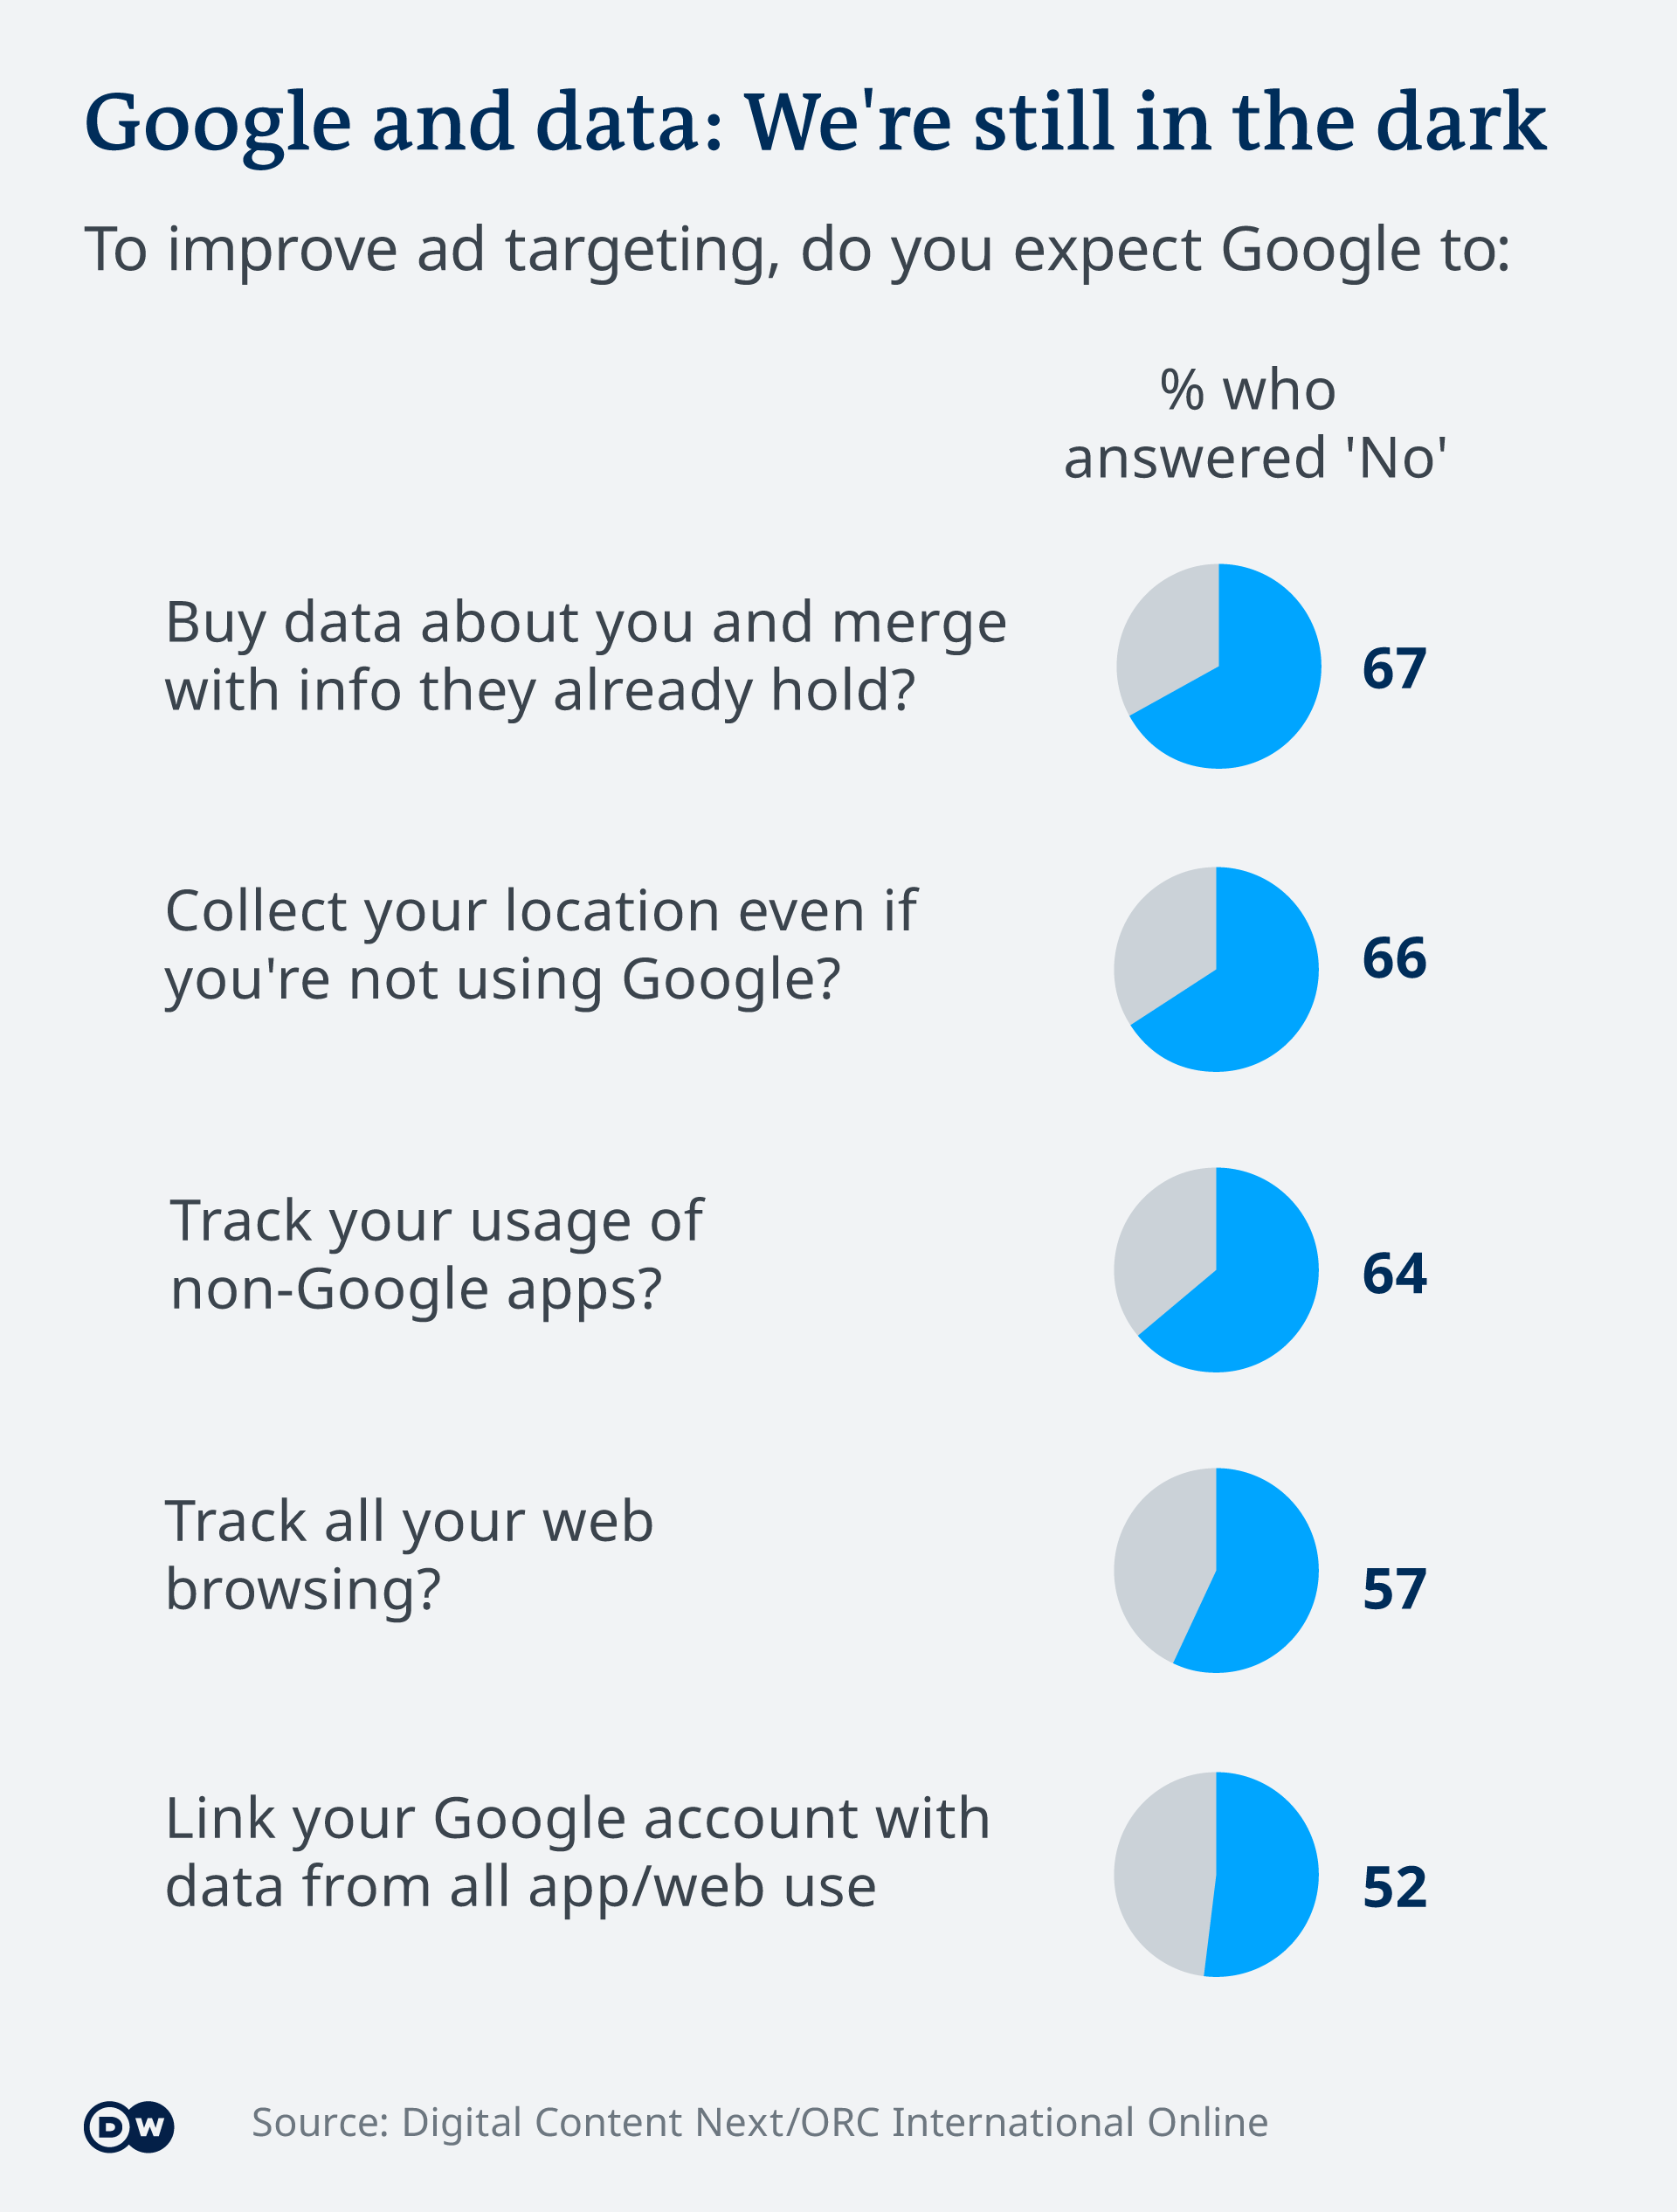 A graphic showing users' expectations of Google